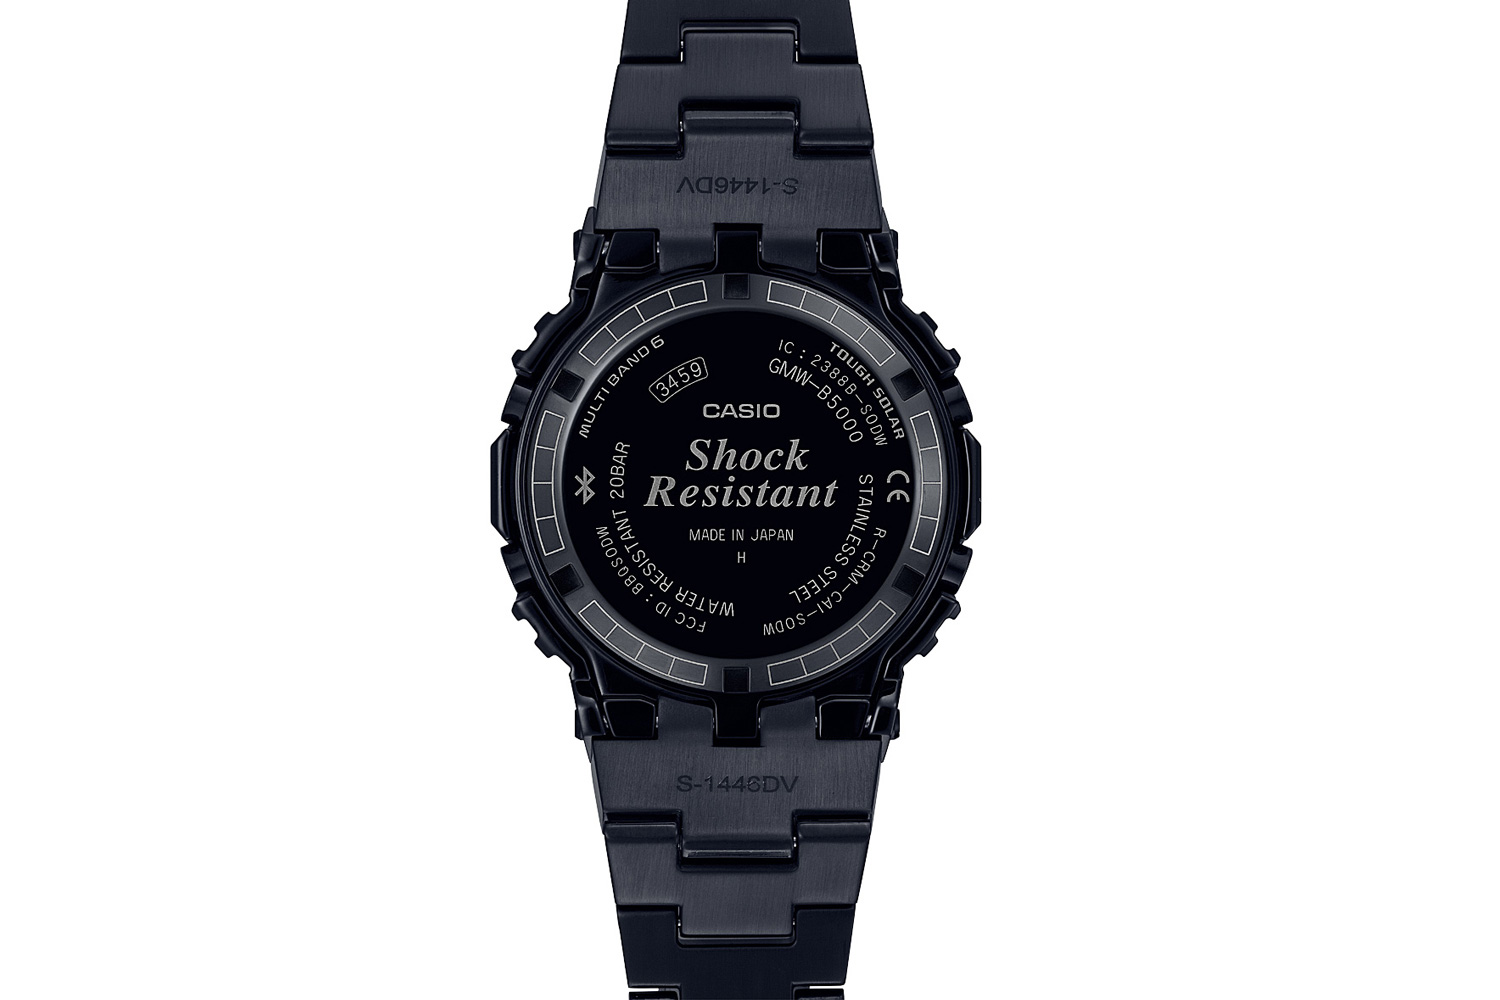 Introducing the Full Metal G-SHOCK GMW-B5000CS with Grid Des 